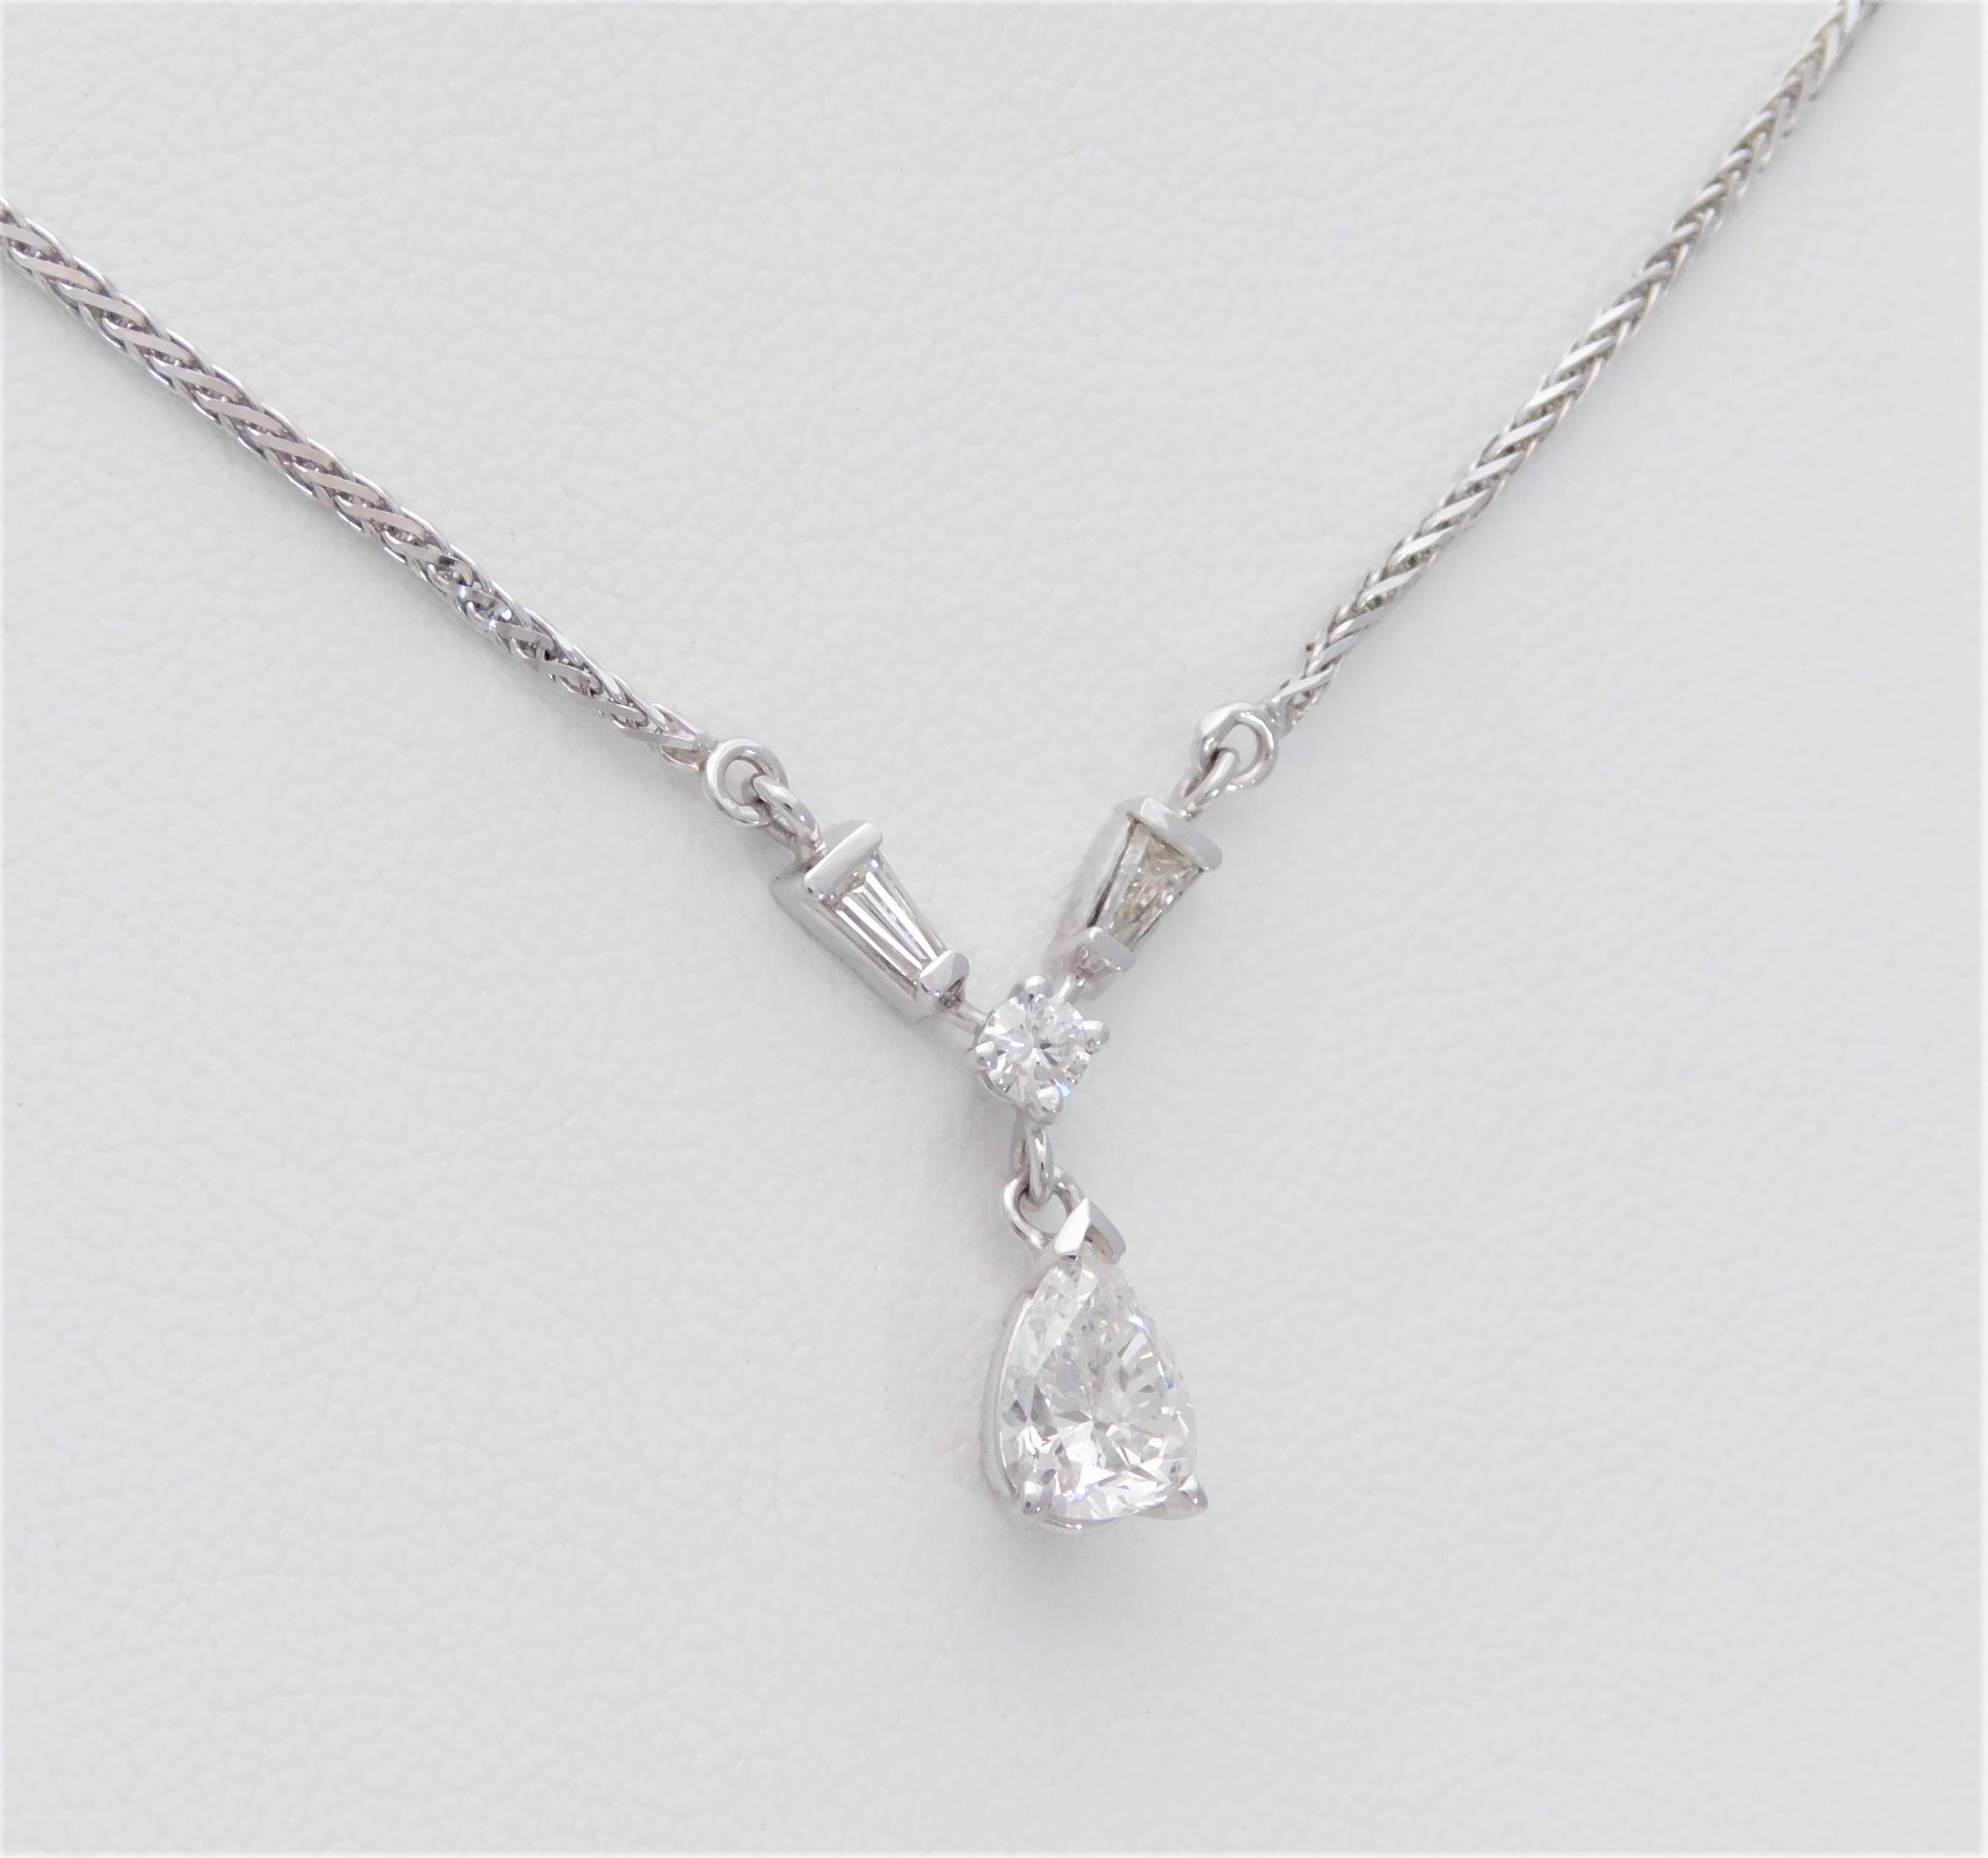 From a charming Southern estate.  Made in Italy, this gorgeous diamond drop-style pendant has been crafted in solid 14k white gold.  In excellent, like new condition.  It features a dazzling natural pear brilliant diamond approximating 1.04ct as its